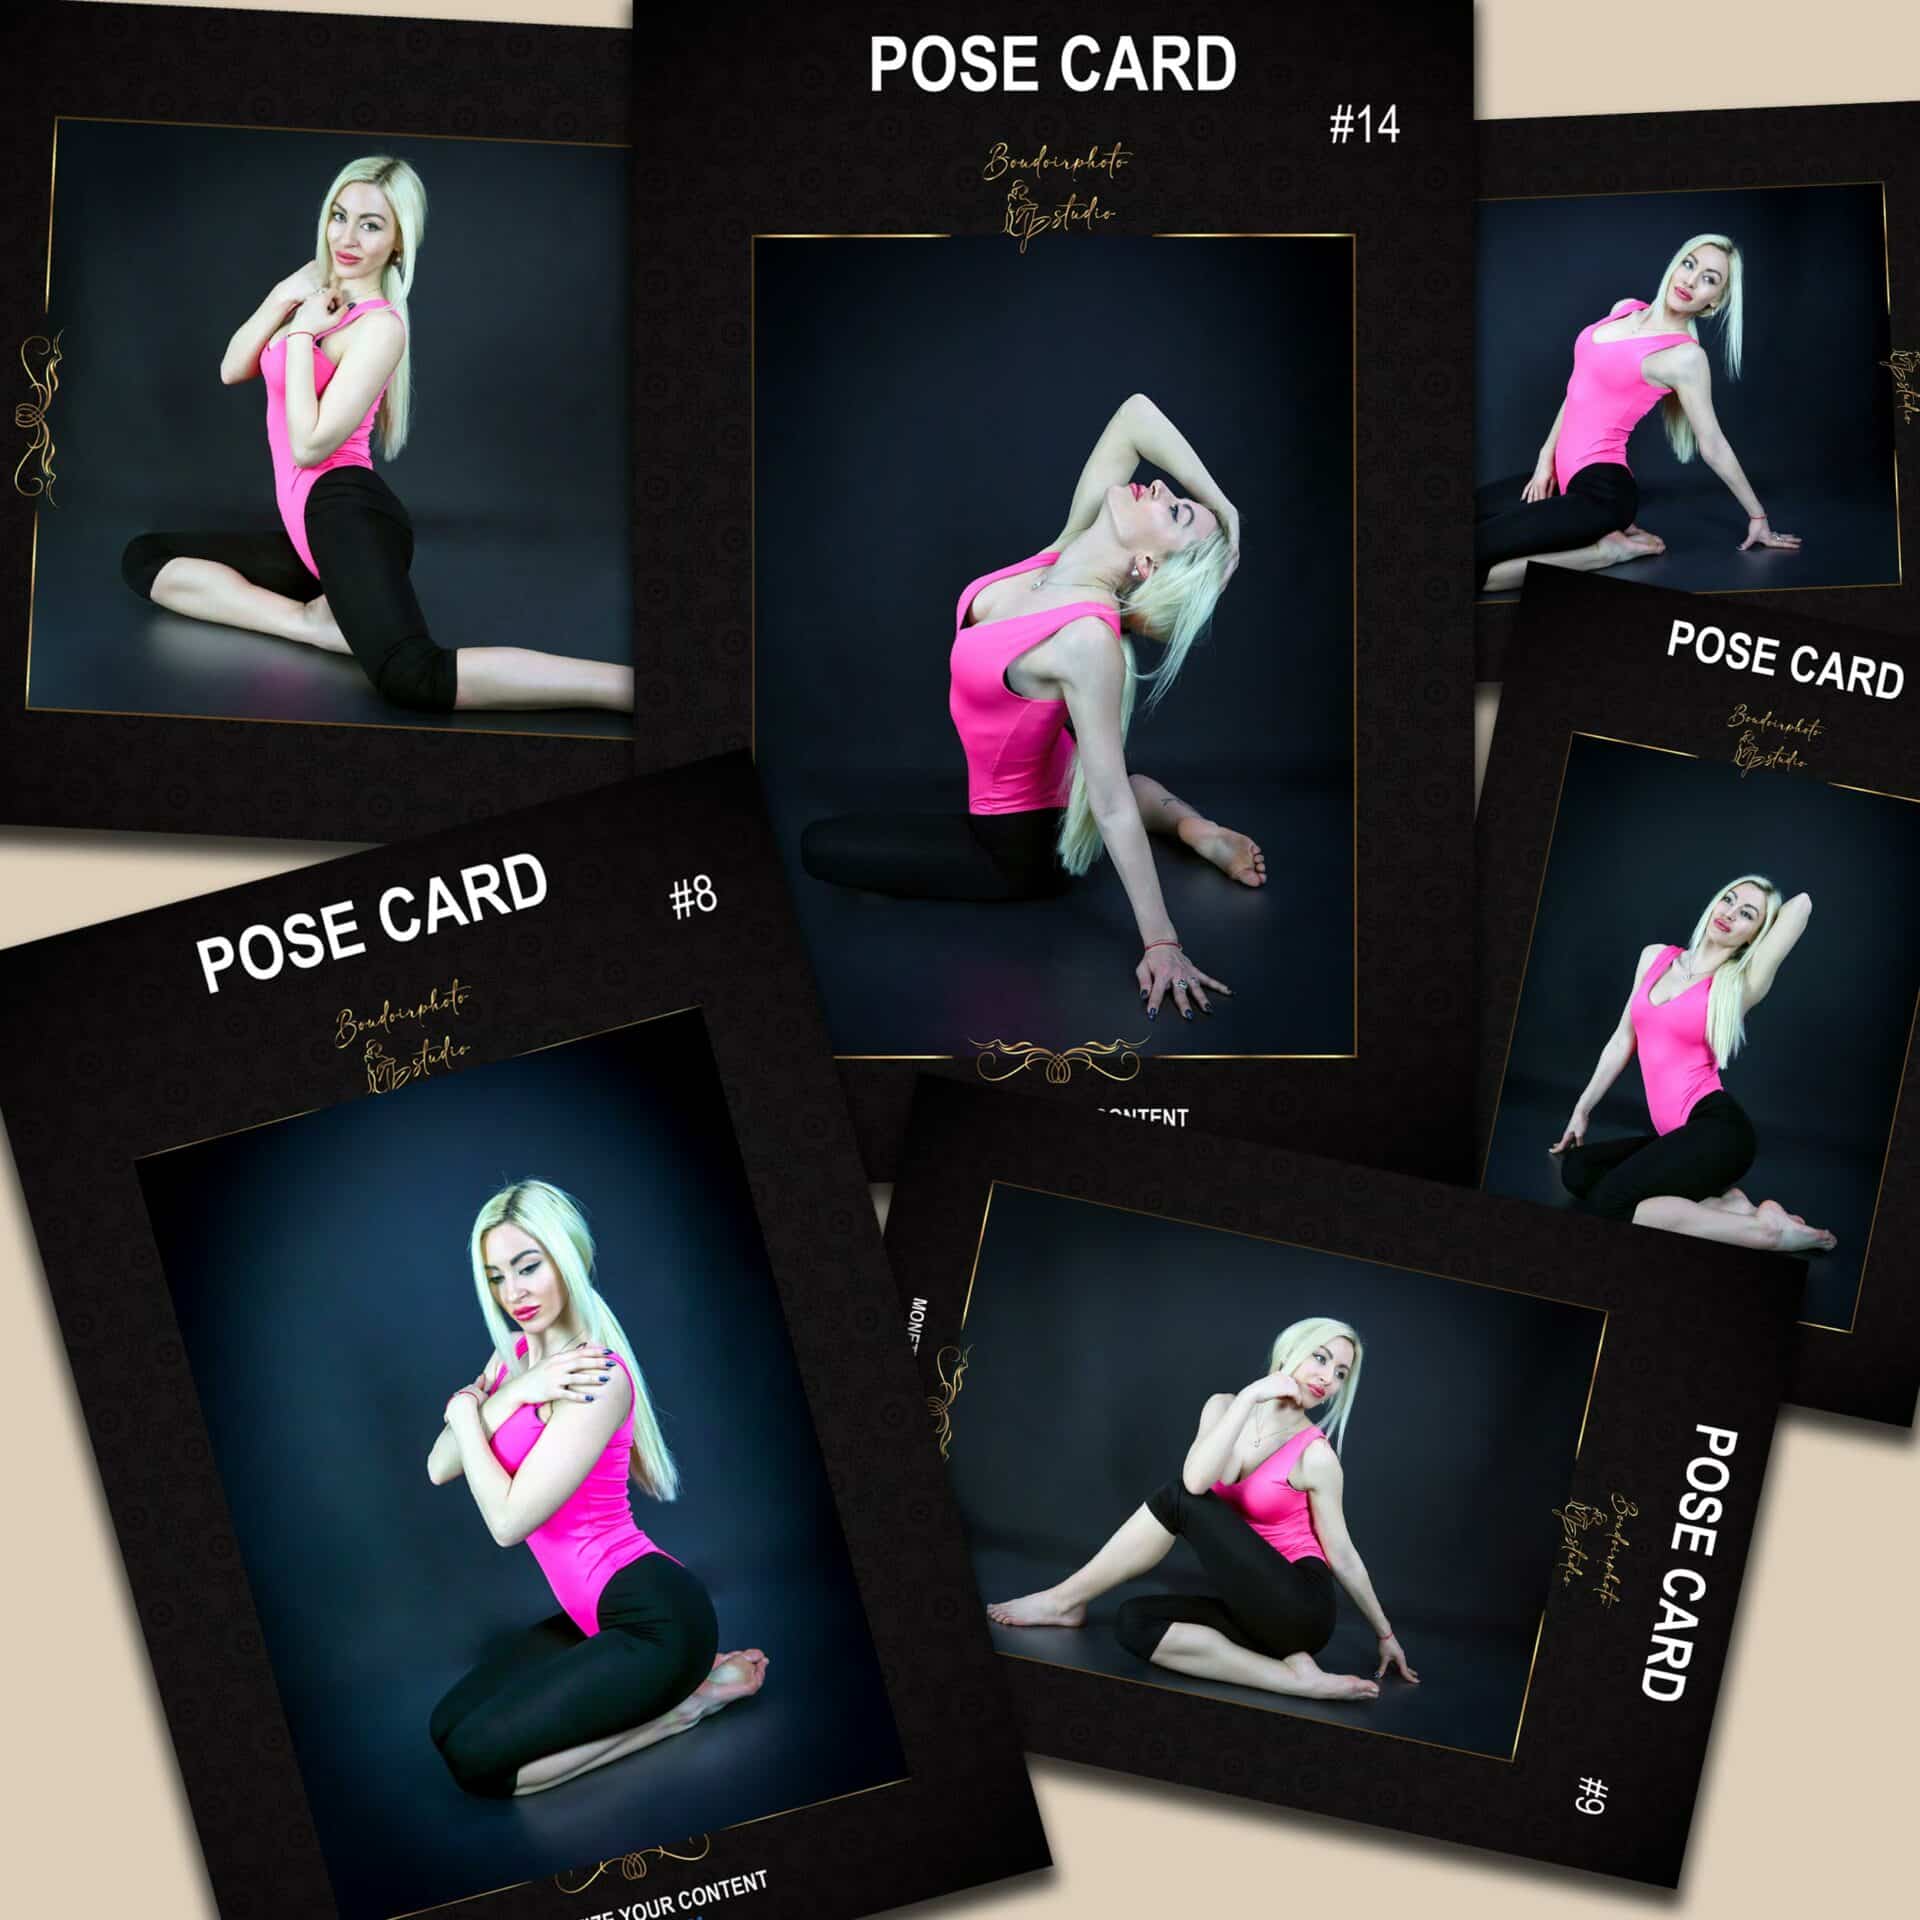 Photo poses for fashion and boudoir photography